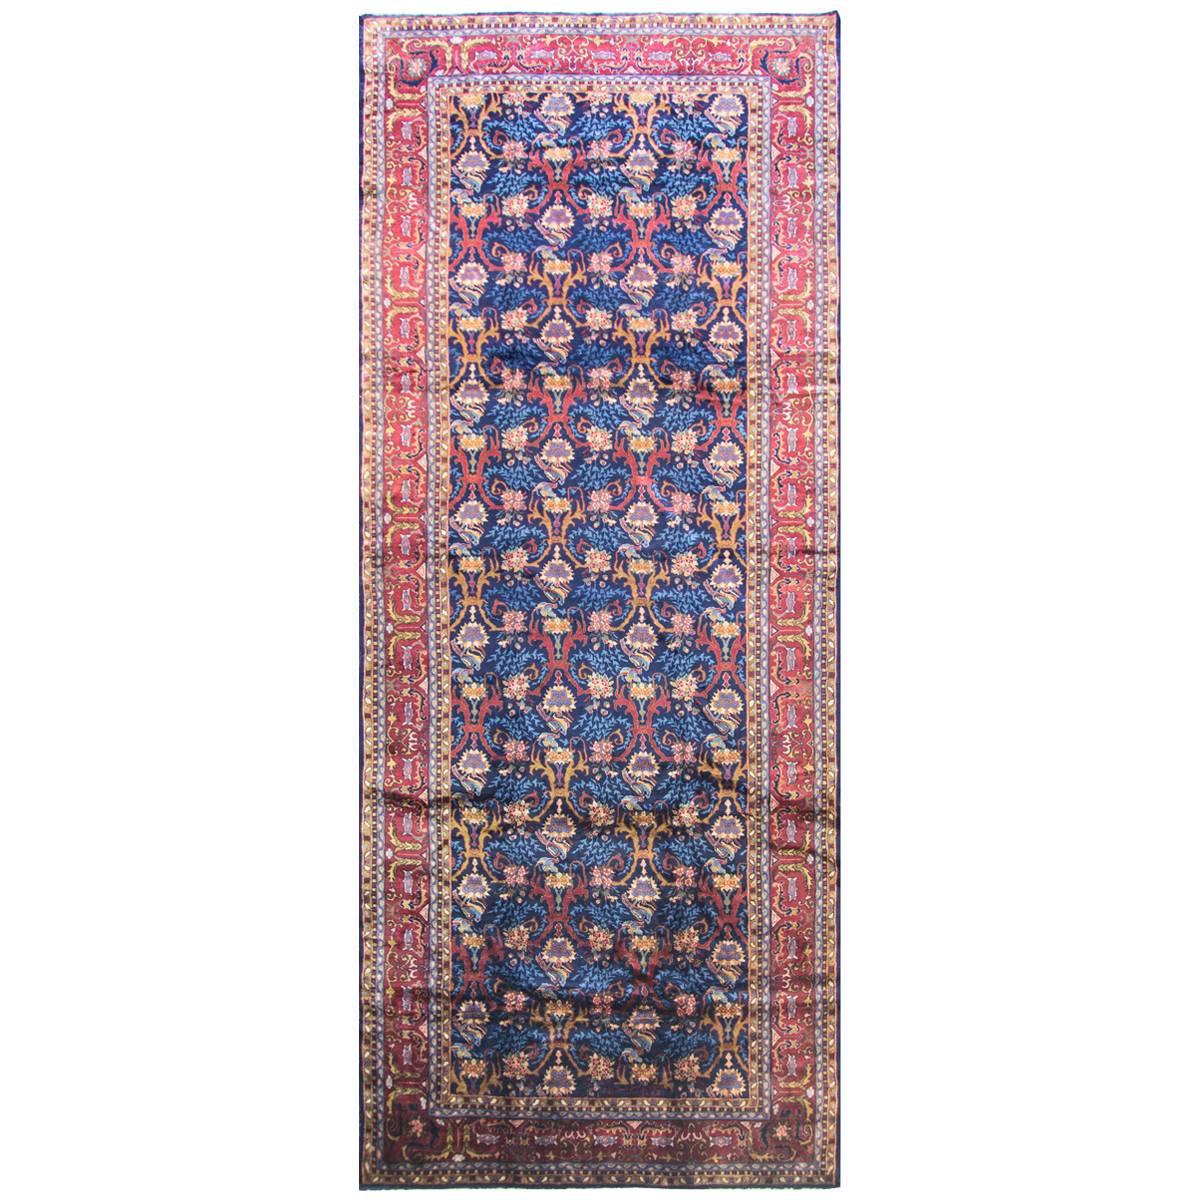 Agra Gallery Size Carpet, Birds of Love, 6'11" x 17'3" For Sale